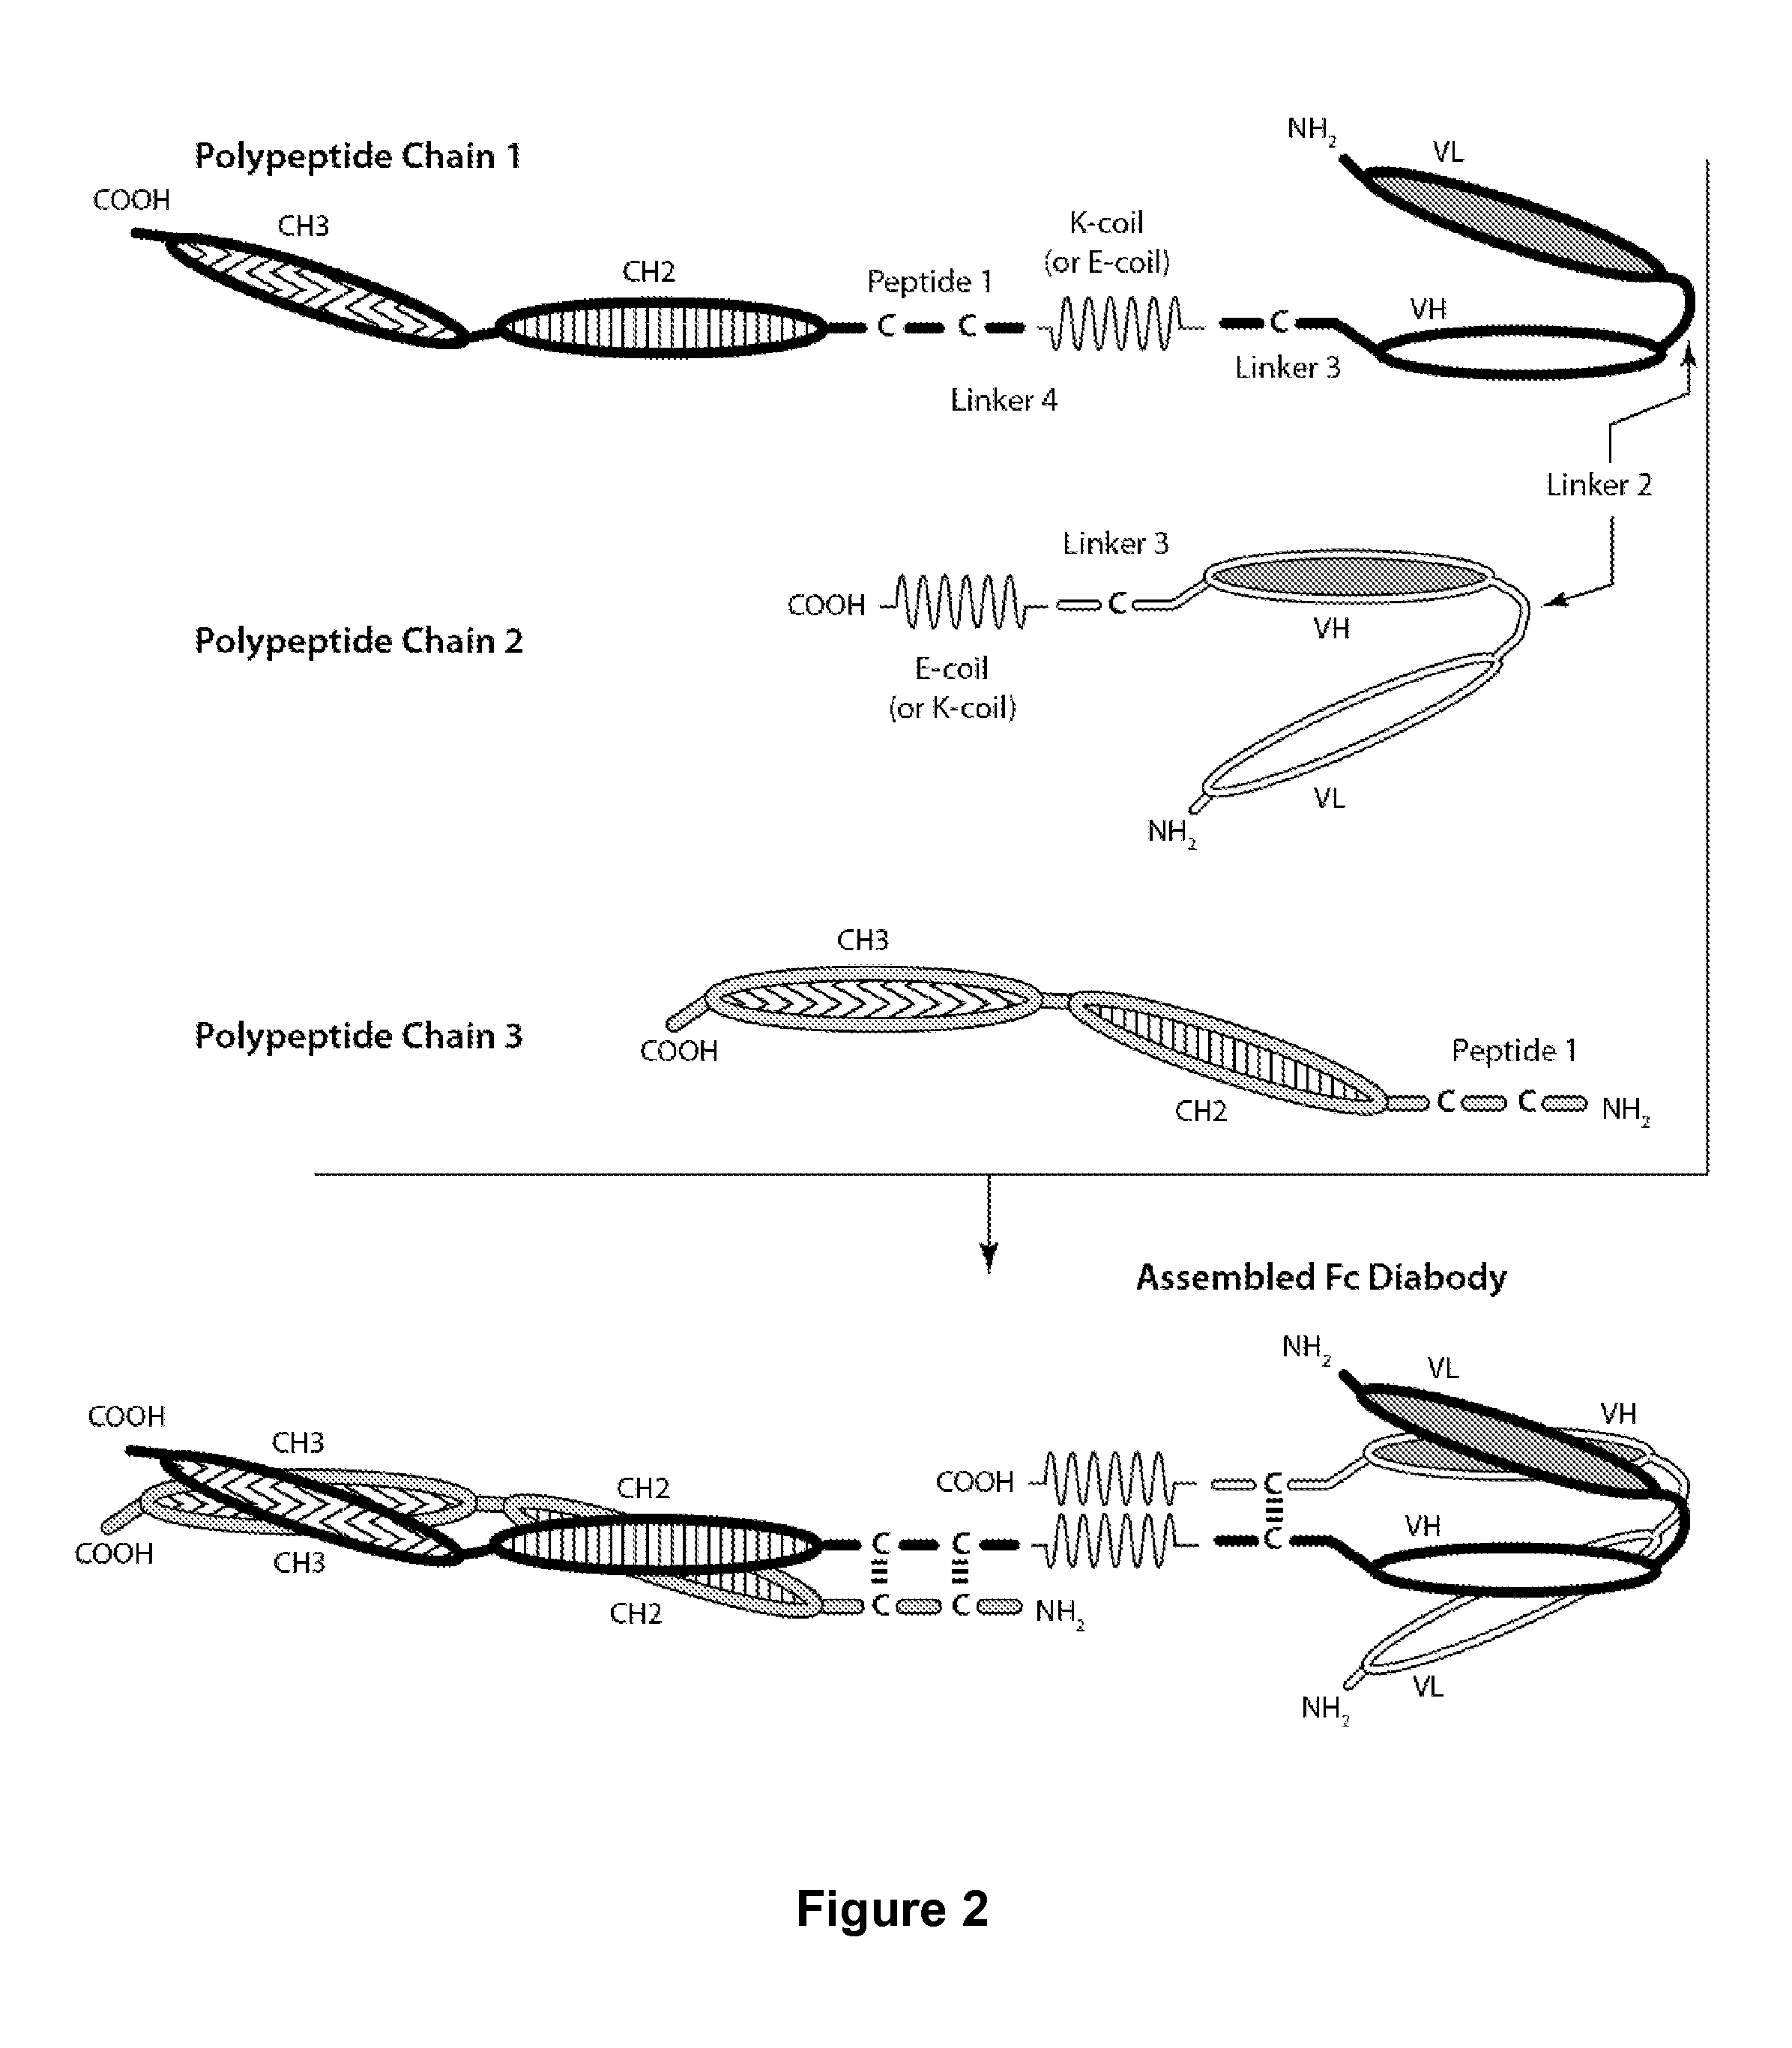 Bi-Specific Monovalent Fc Diabodies That Are Capable of Binding CD32B and CD79b and Uses Thereof